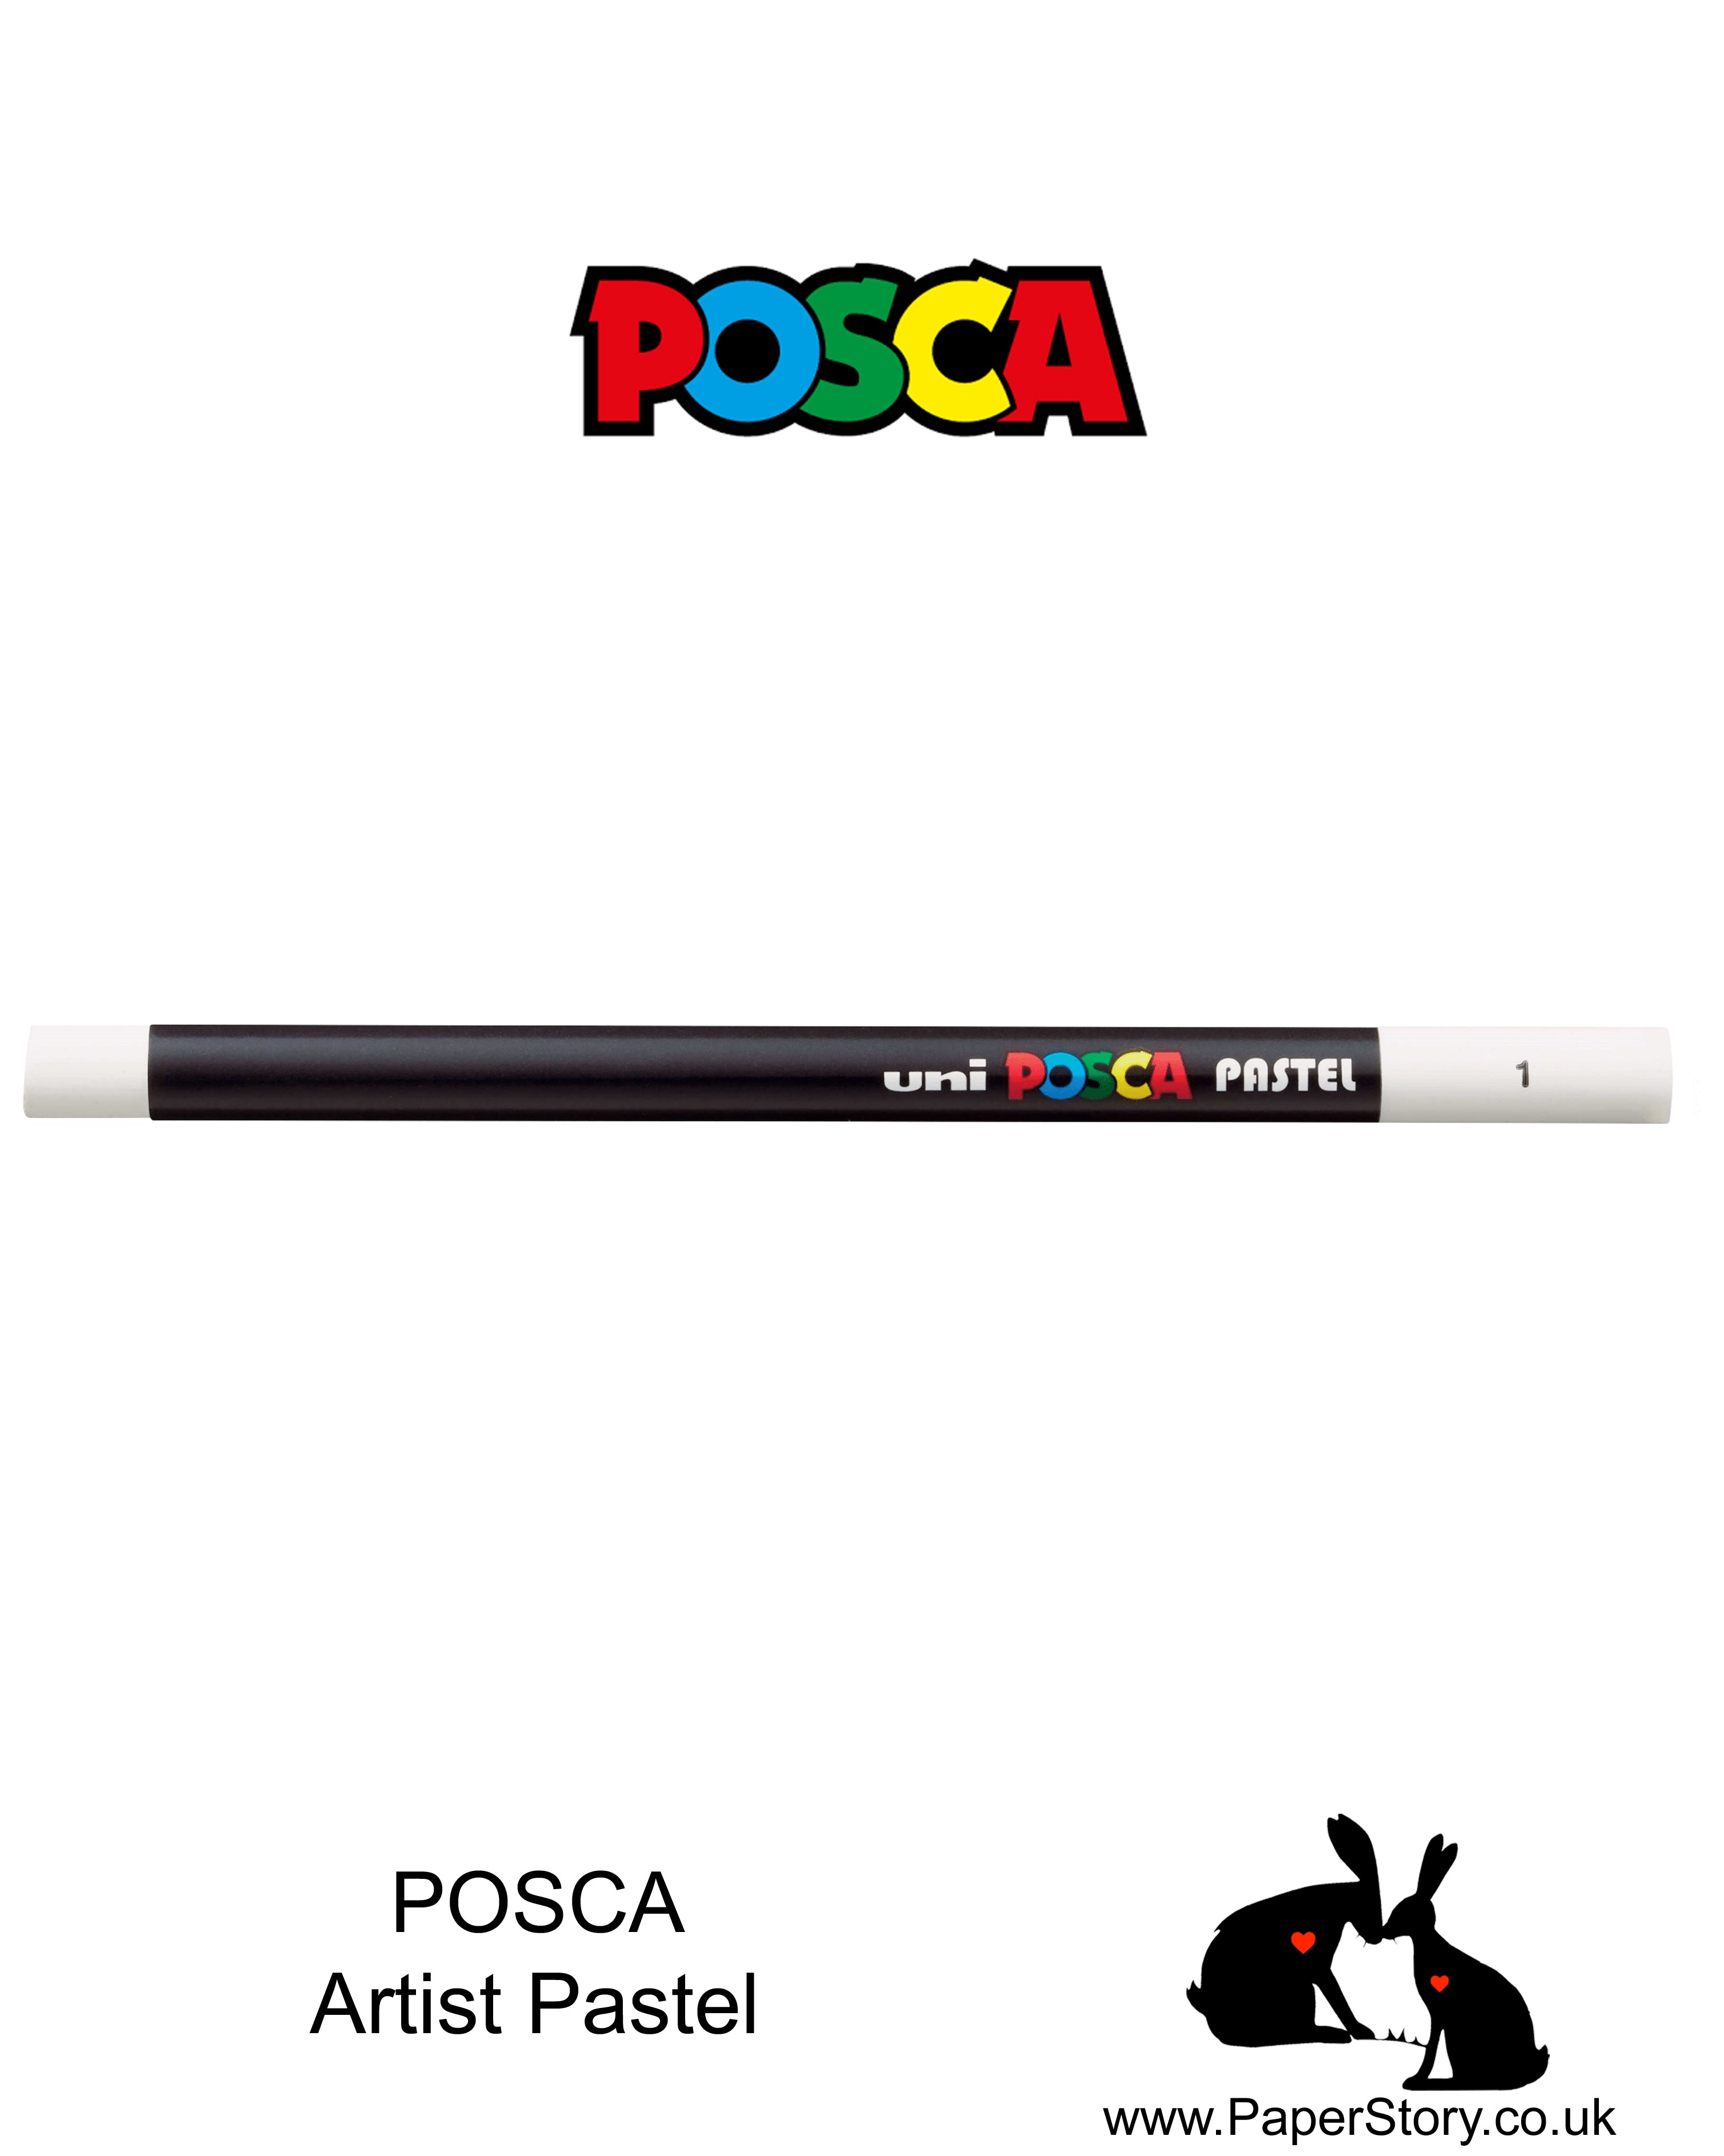 New POSCA Pastels White colour, Colours can be blended and overlaid, you can stipple, colour block, cross-hatch, scratch and outline. You can heat the sticks to create textured effects.